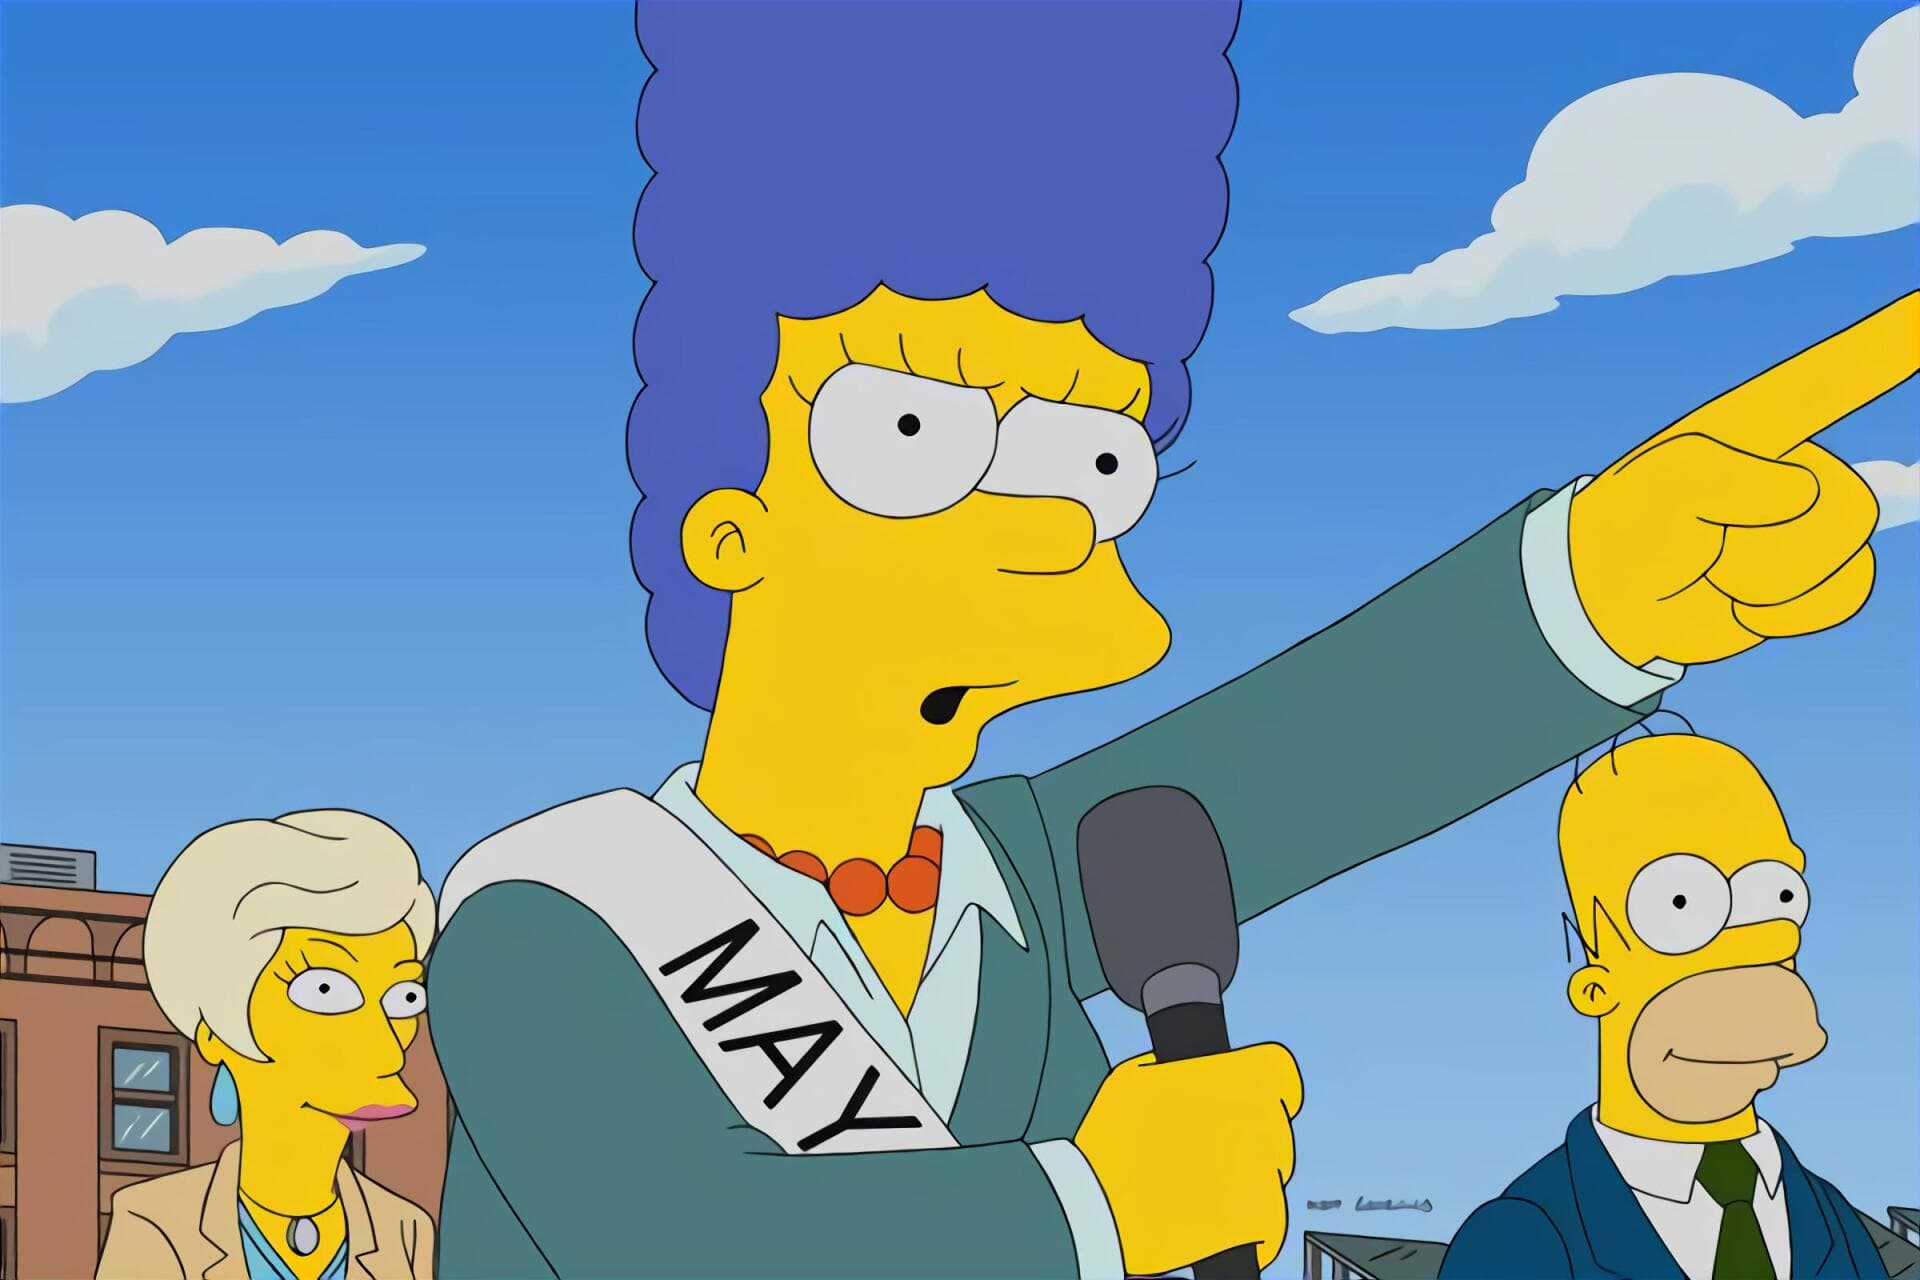 The Simpsons - The Old Blue Mayor She Ain't What She Used to Be